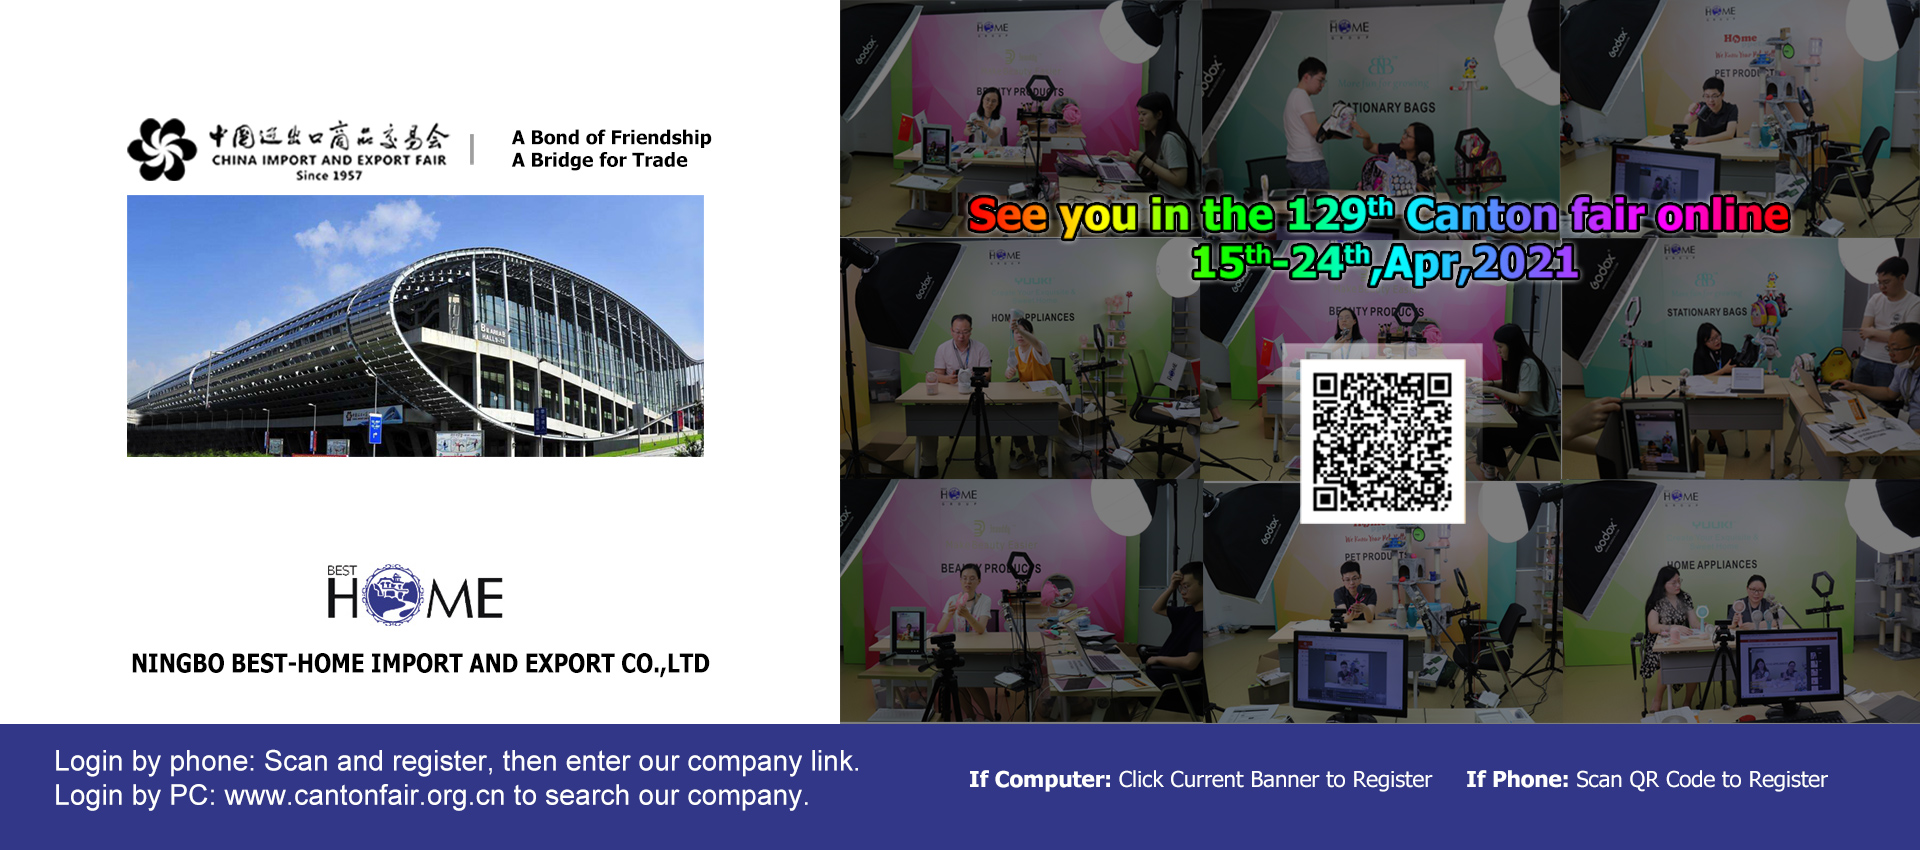 The 129th Canton Fair from April 15-24, 2021-BEST HOME